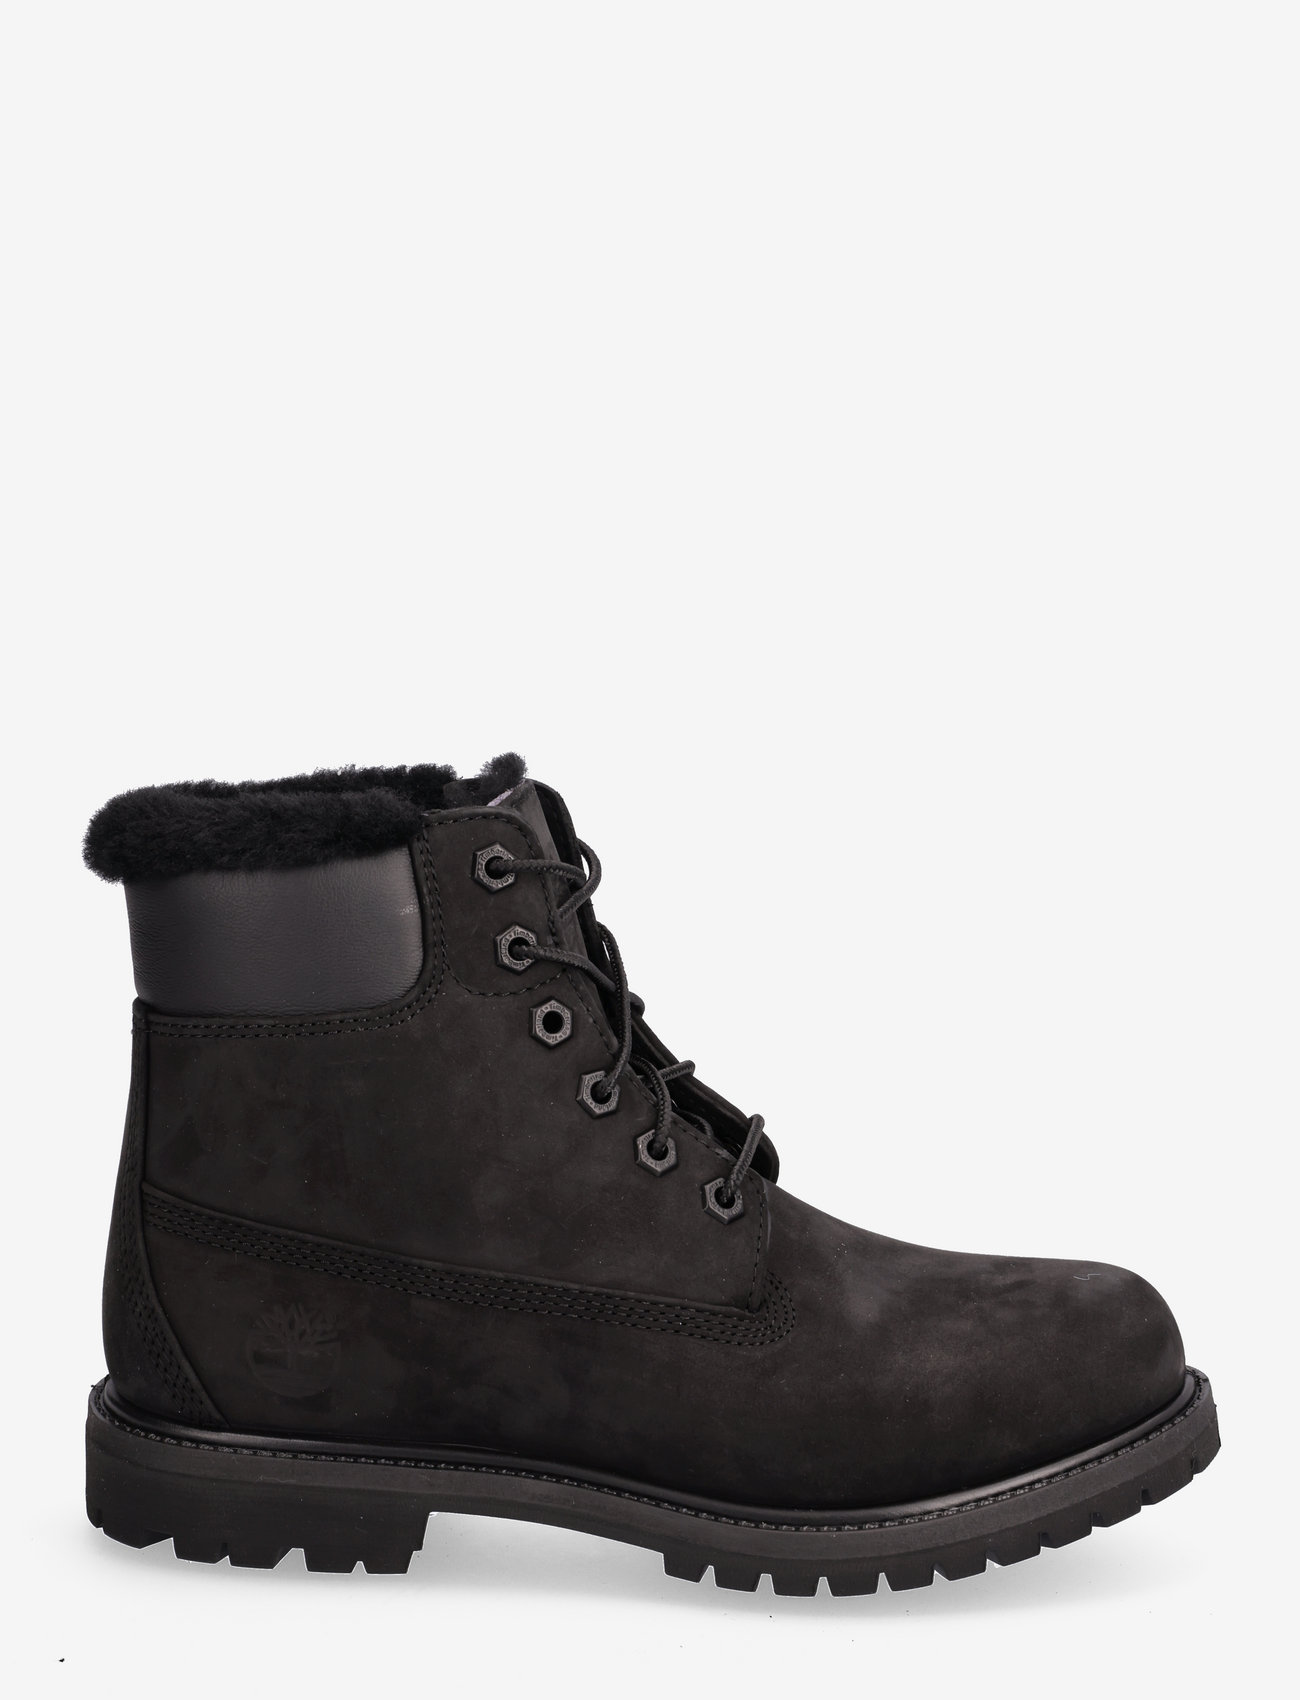 Timberland - 6in Premium Shearling Lined WP Boot - kängor - black - 1